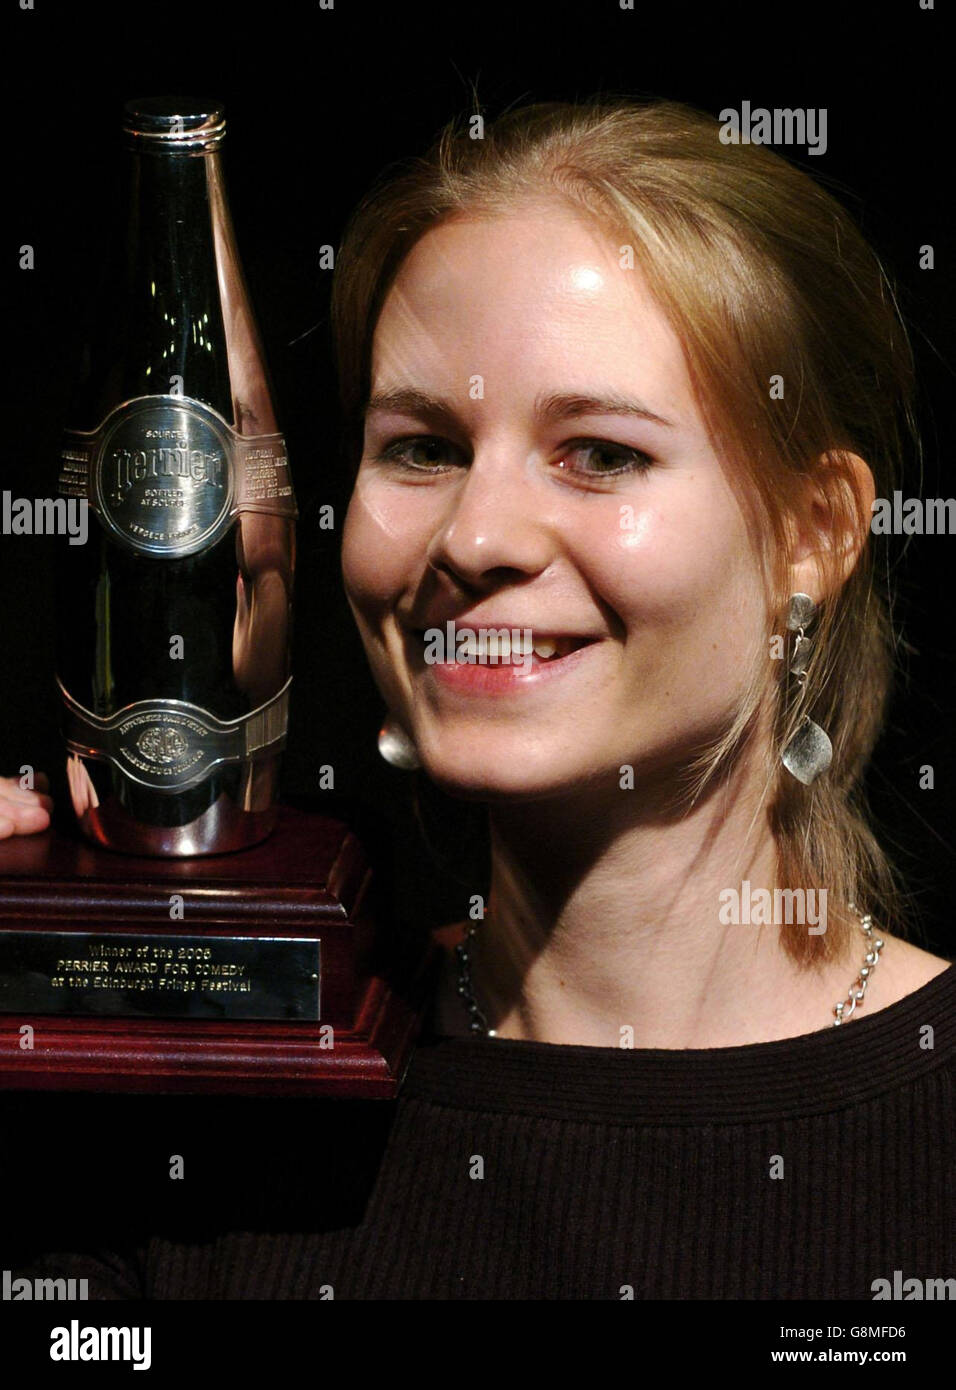 Laura Solon one of the nominees for the 2005 Perrier Comedy Award at a photocall with the award in Edinburgh, Thursday 25 August 2005, the winner will be named 27/08/2005. PRESS ASSOCIATION photo. Photo Credit should read: David Cheskin/PA. Stock Photo